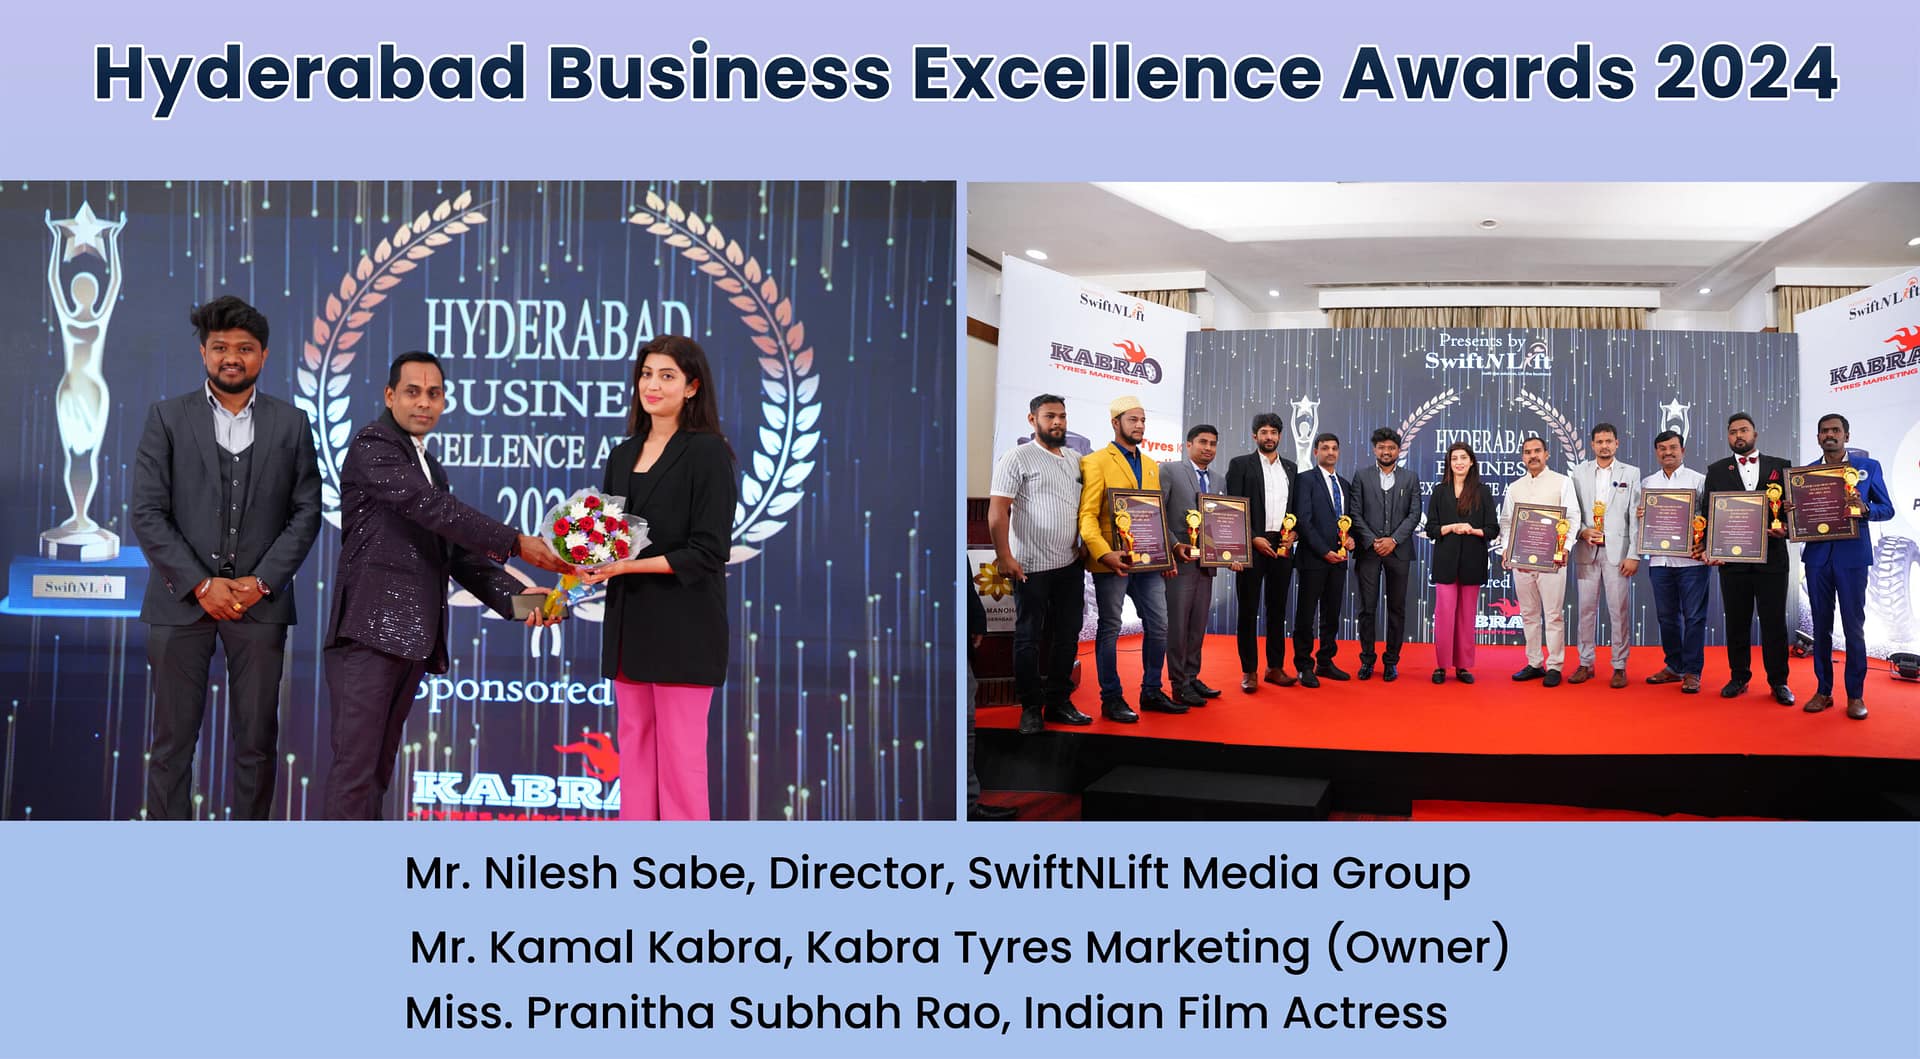 Hydrabad Business Excellence Awards 2024 Presented by SwiftNLift Media Group